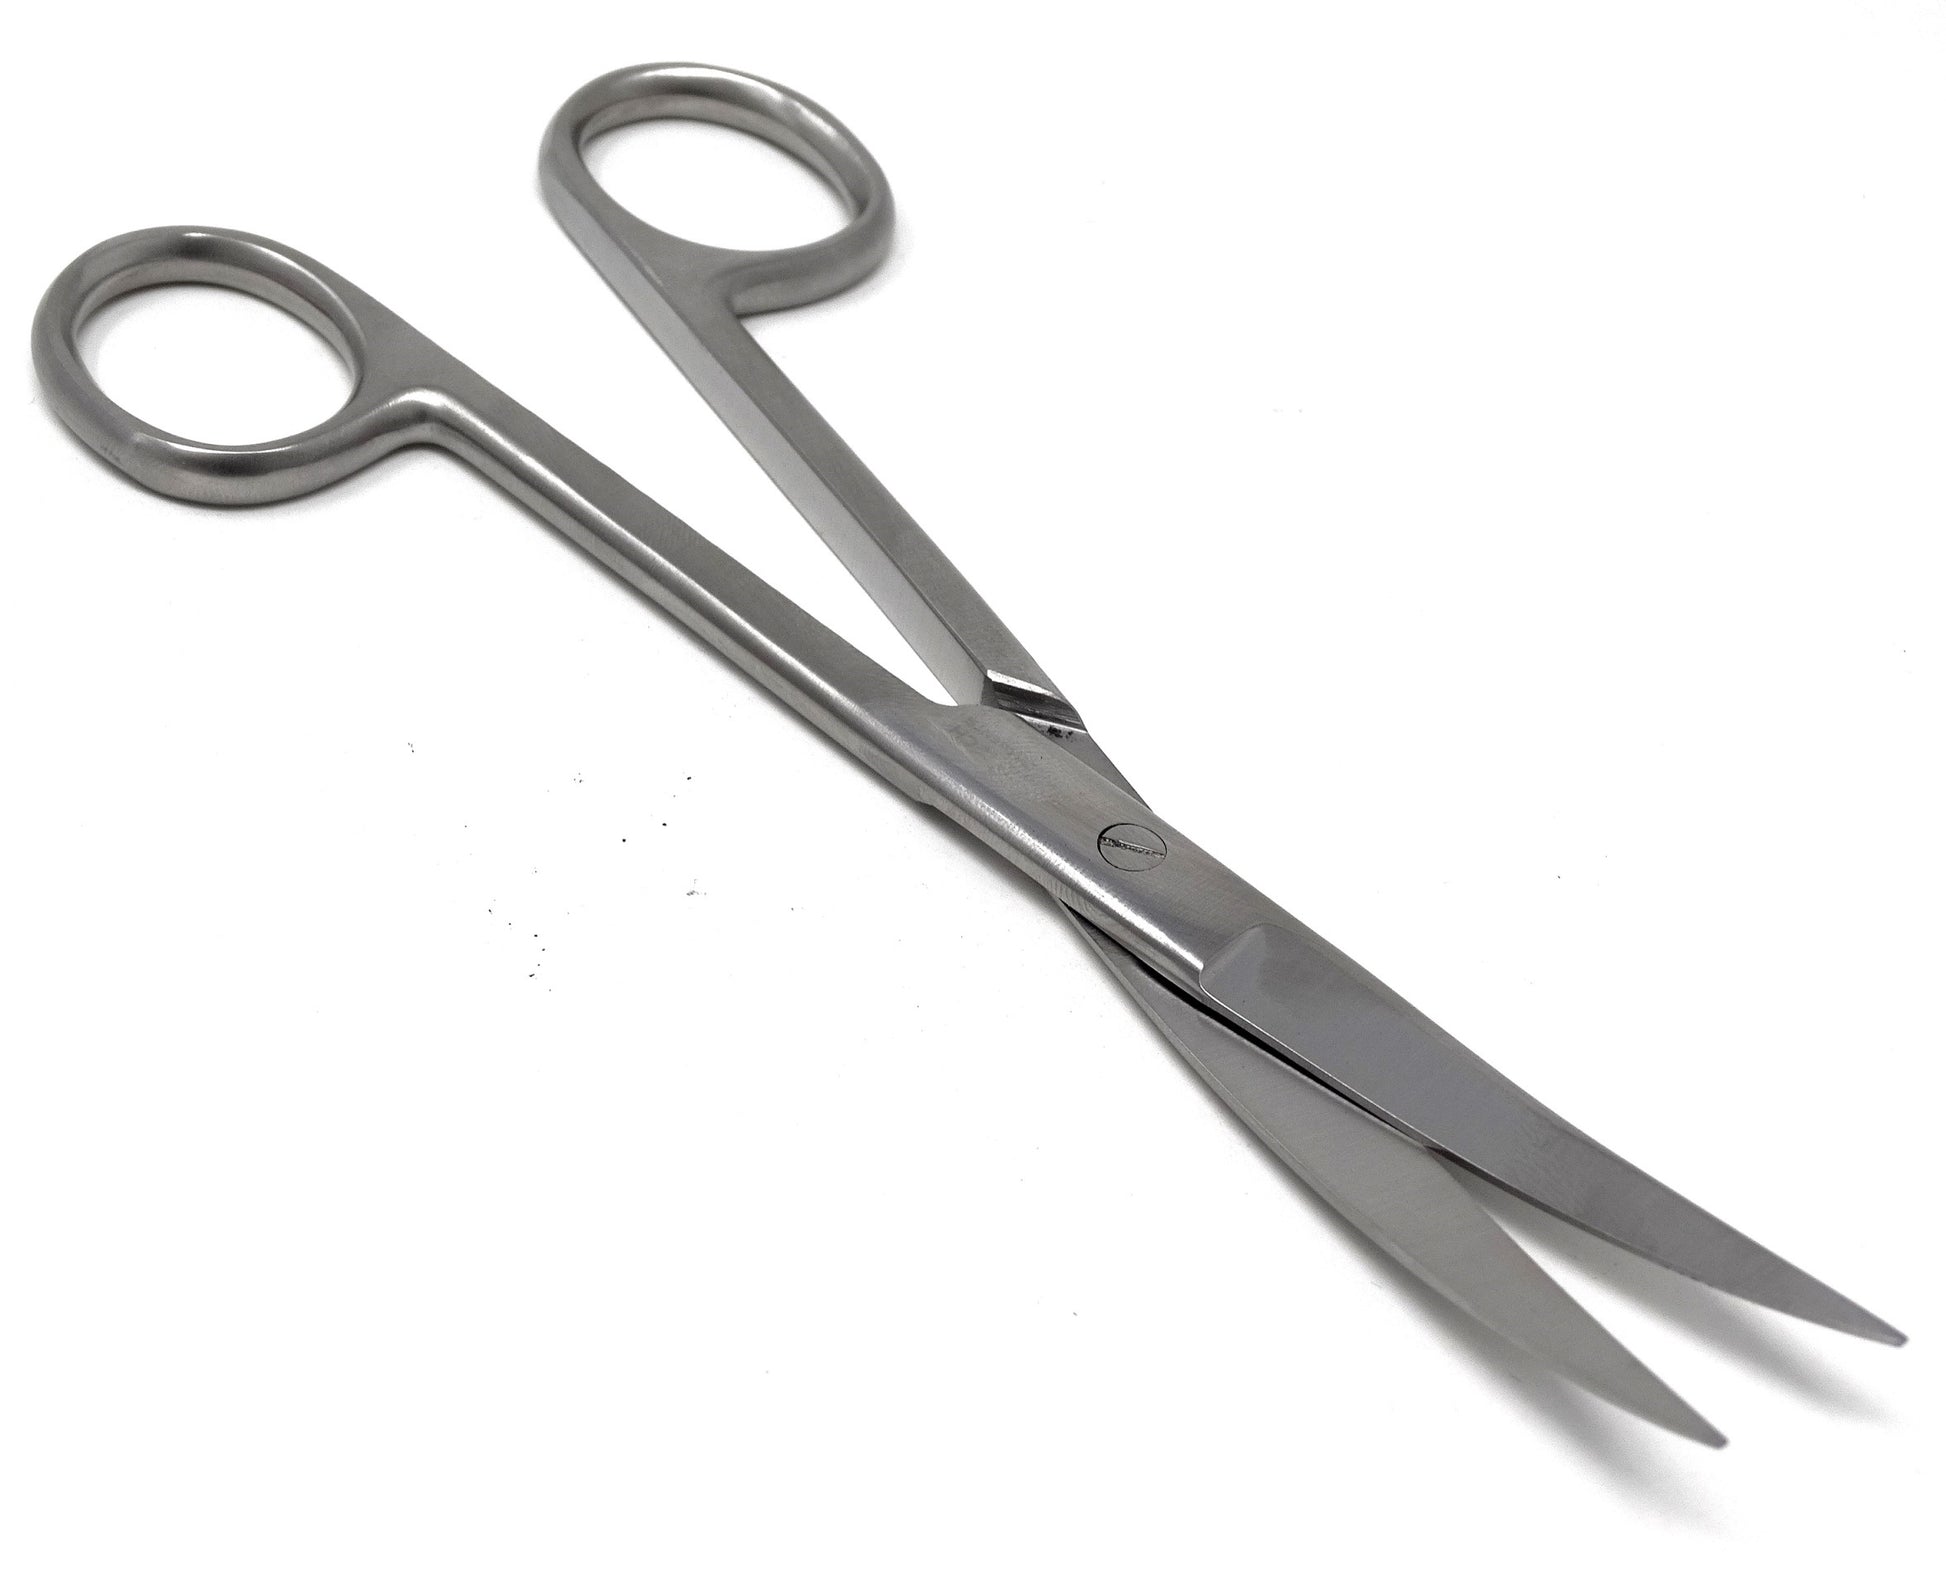 Buy Curved Stainless Steel Medical Operating Scissors, Sharp Blunt